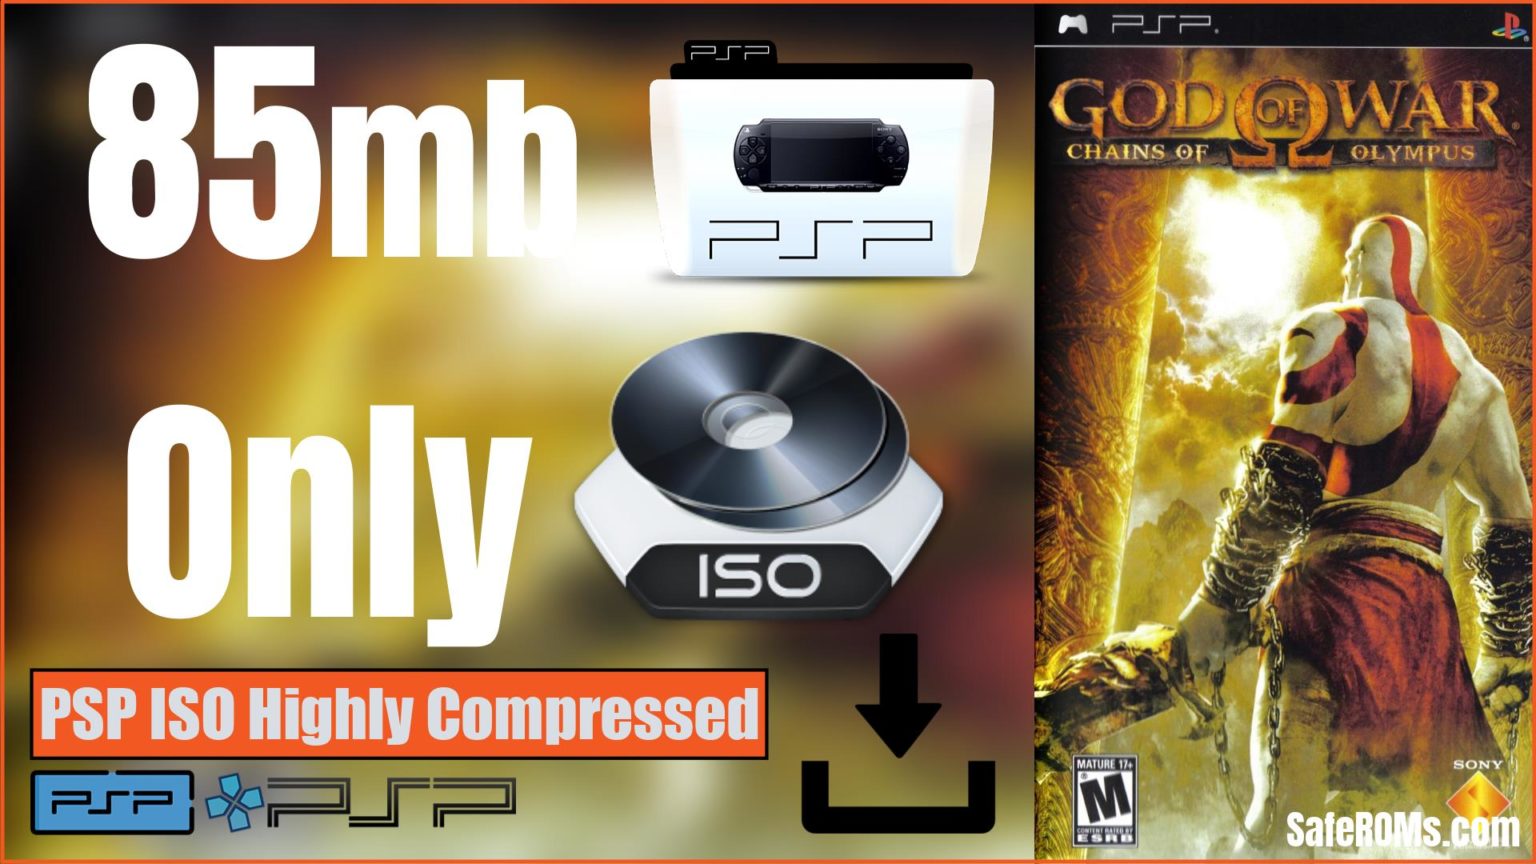 God of War Chains of Olympus PSP ISO Highly Compressed